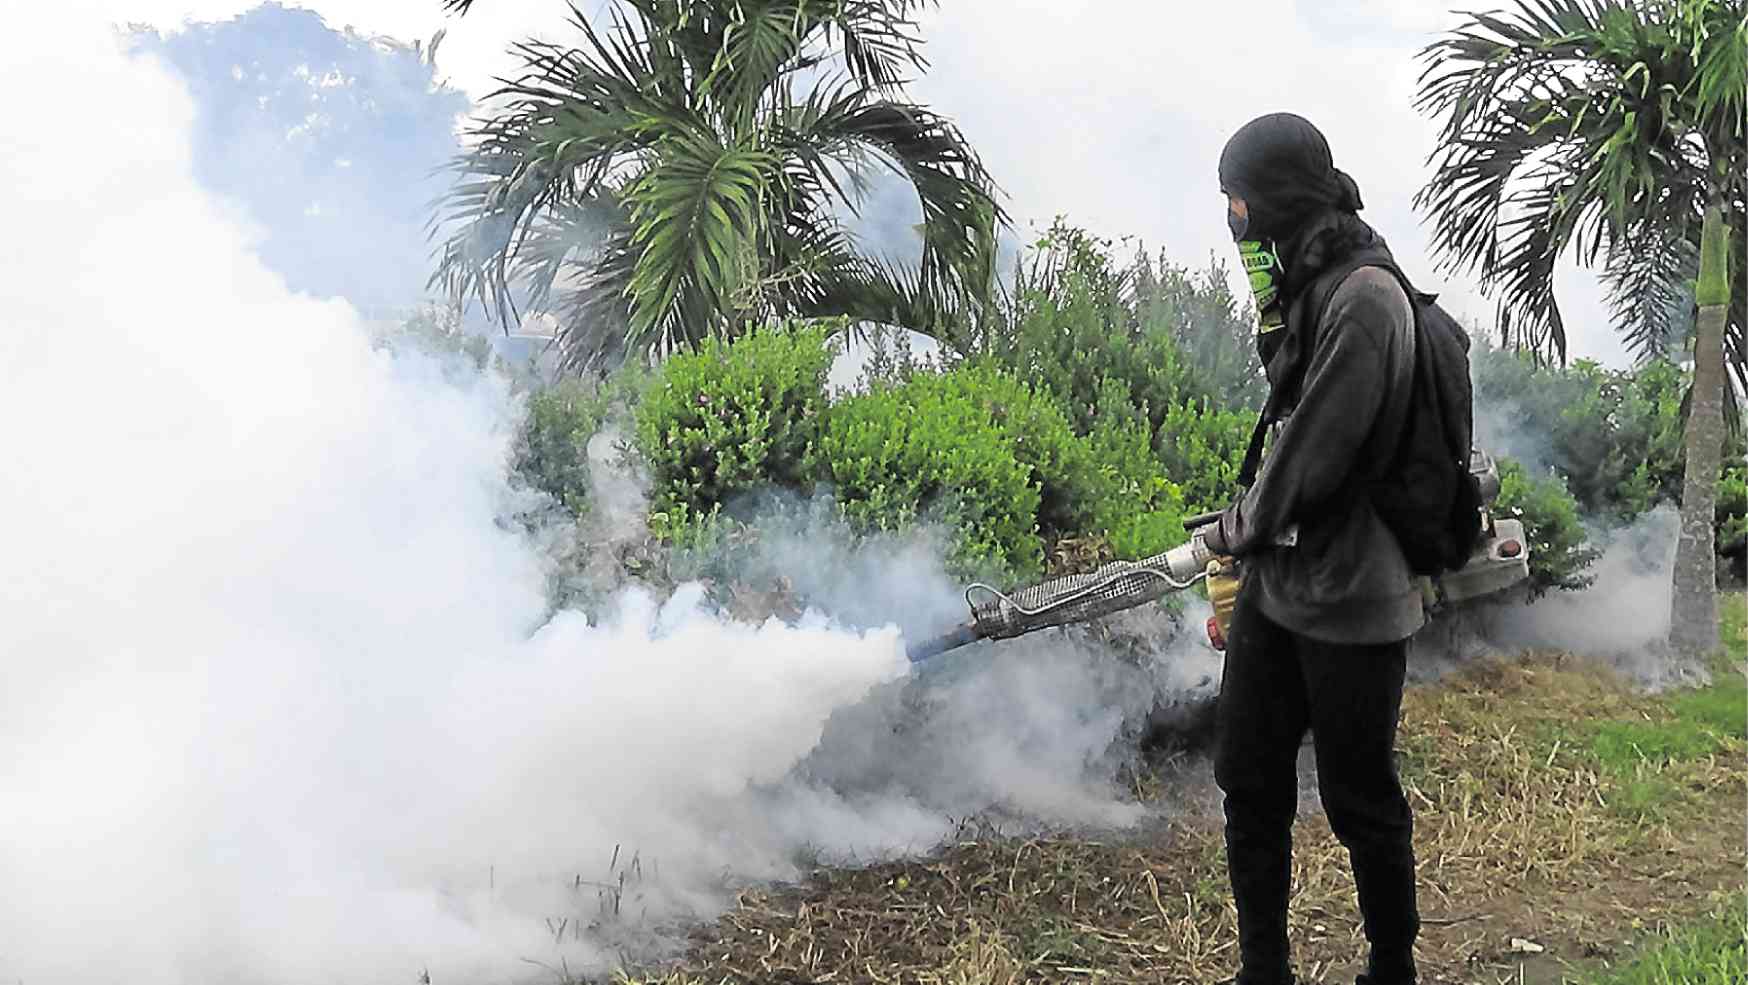 Villagers go on holiday in dengue drive